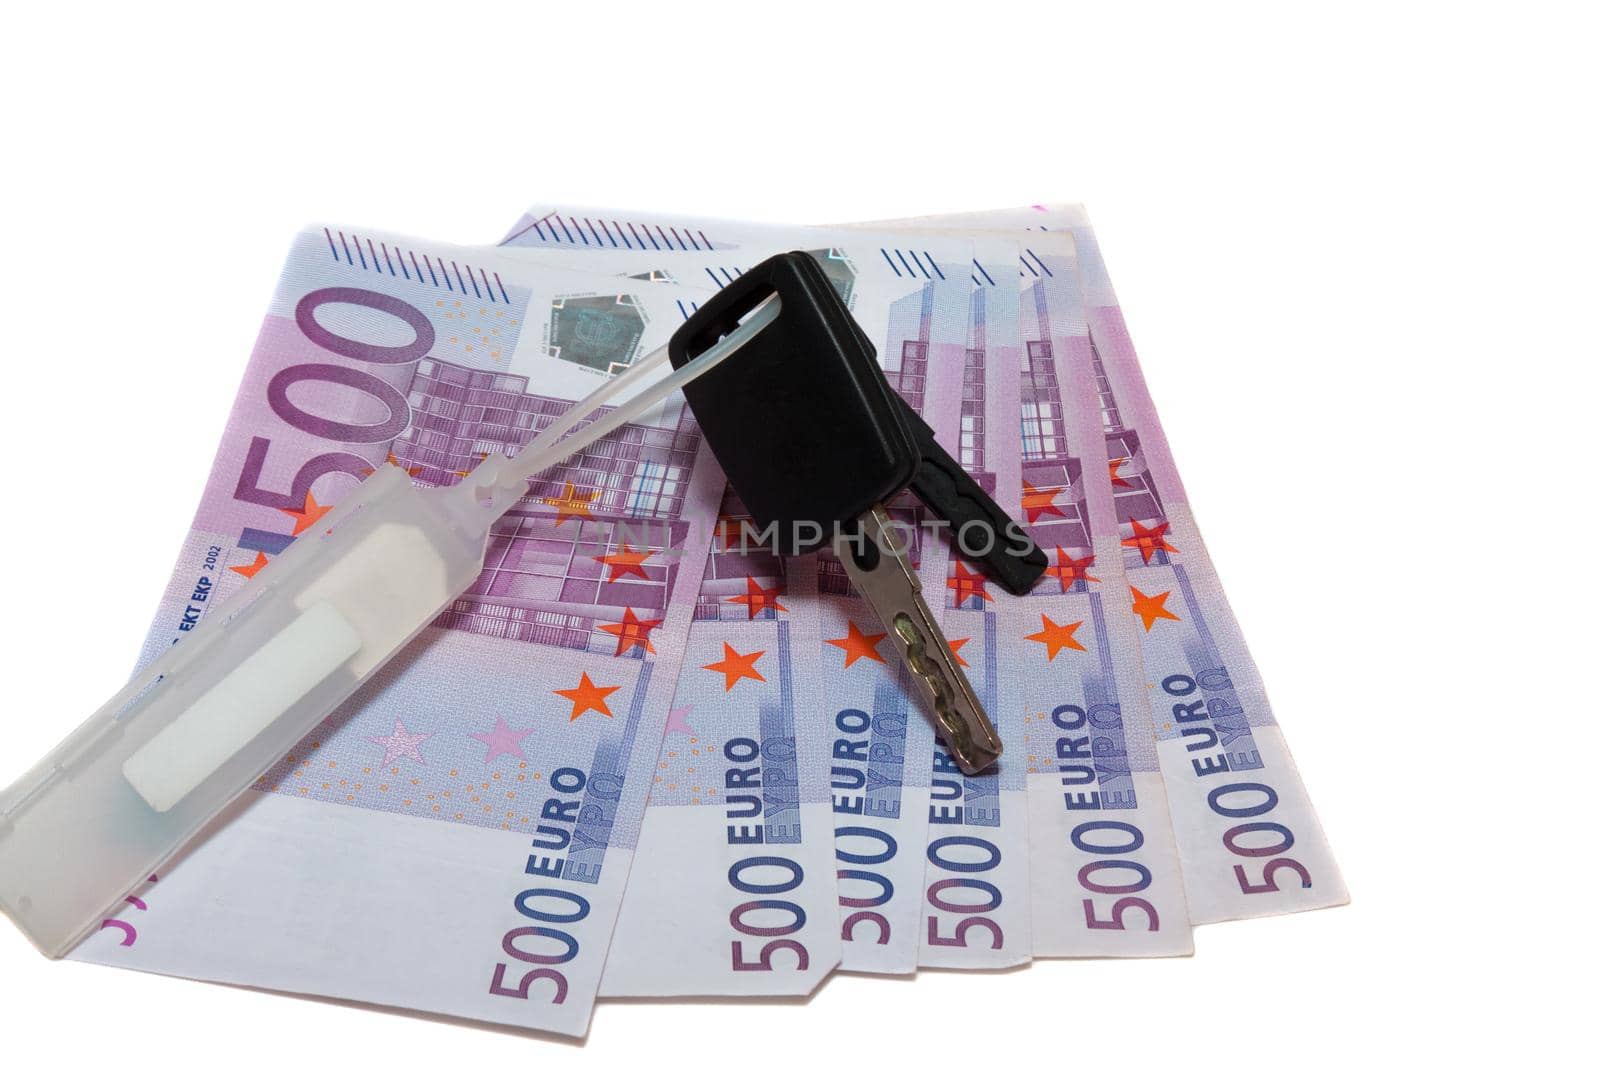 banknotes of 500 euros and the car keys by client111